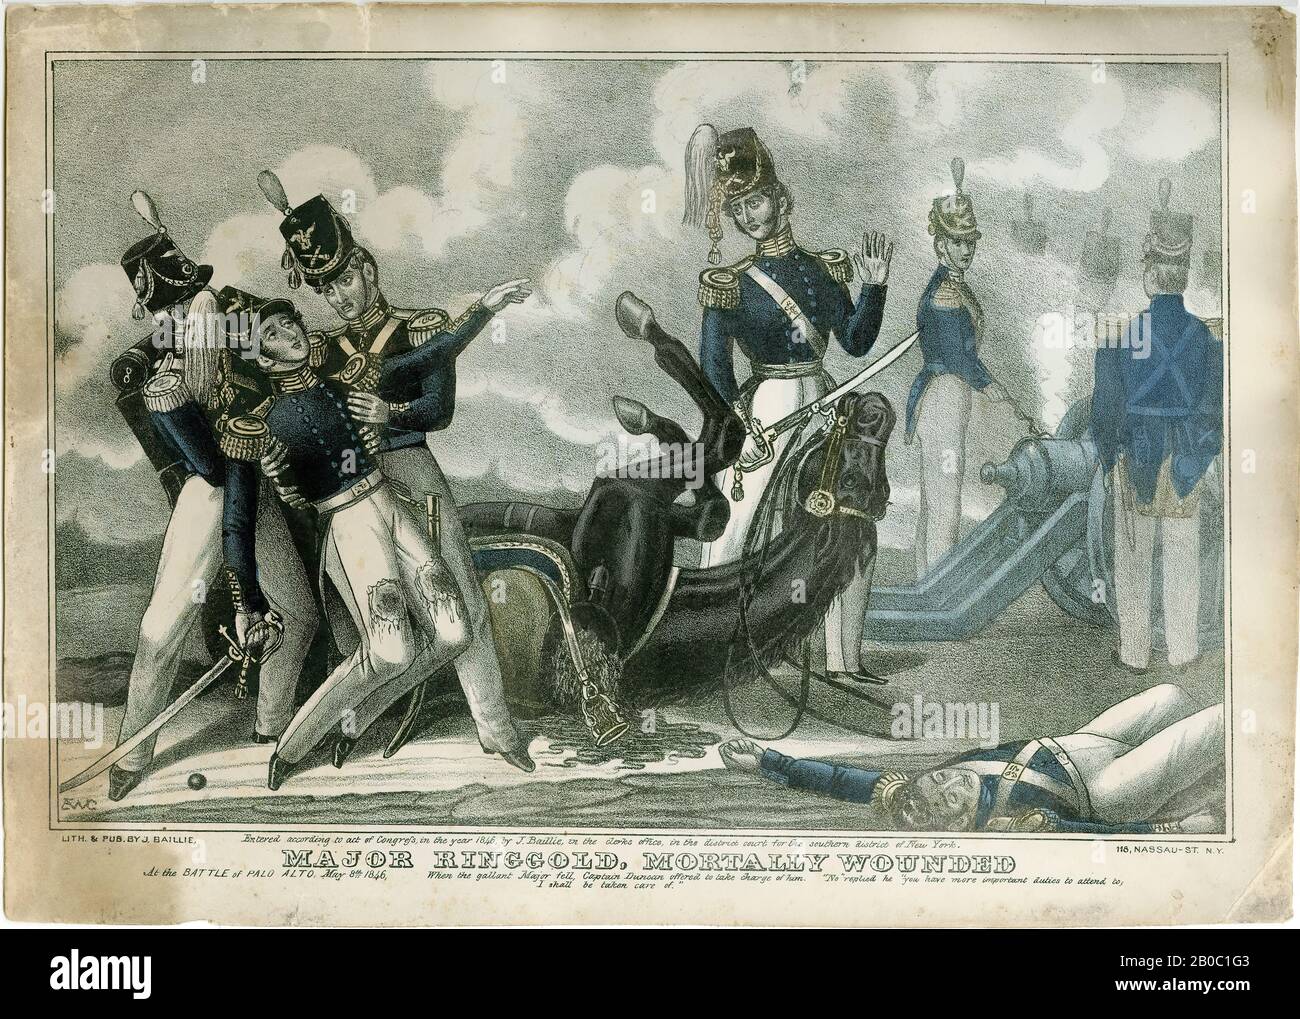 A. W. C., Part of a Collection of Mexican-American War Prints, Major Ringold, Mortally Wounded (At the Battle of Palo Alto, May 8, 1846), 1846, color lithograph on paper, 10 in. x 14 1/16 in. (25.4 cm x 35.72 cm Stock Photo